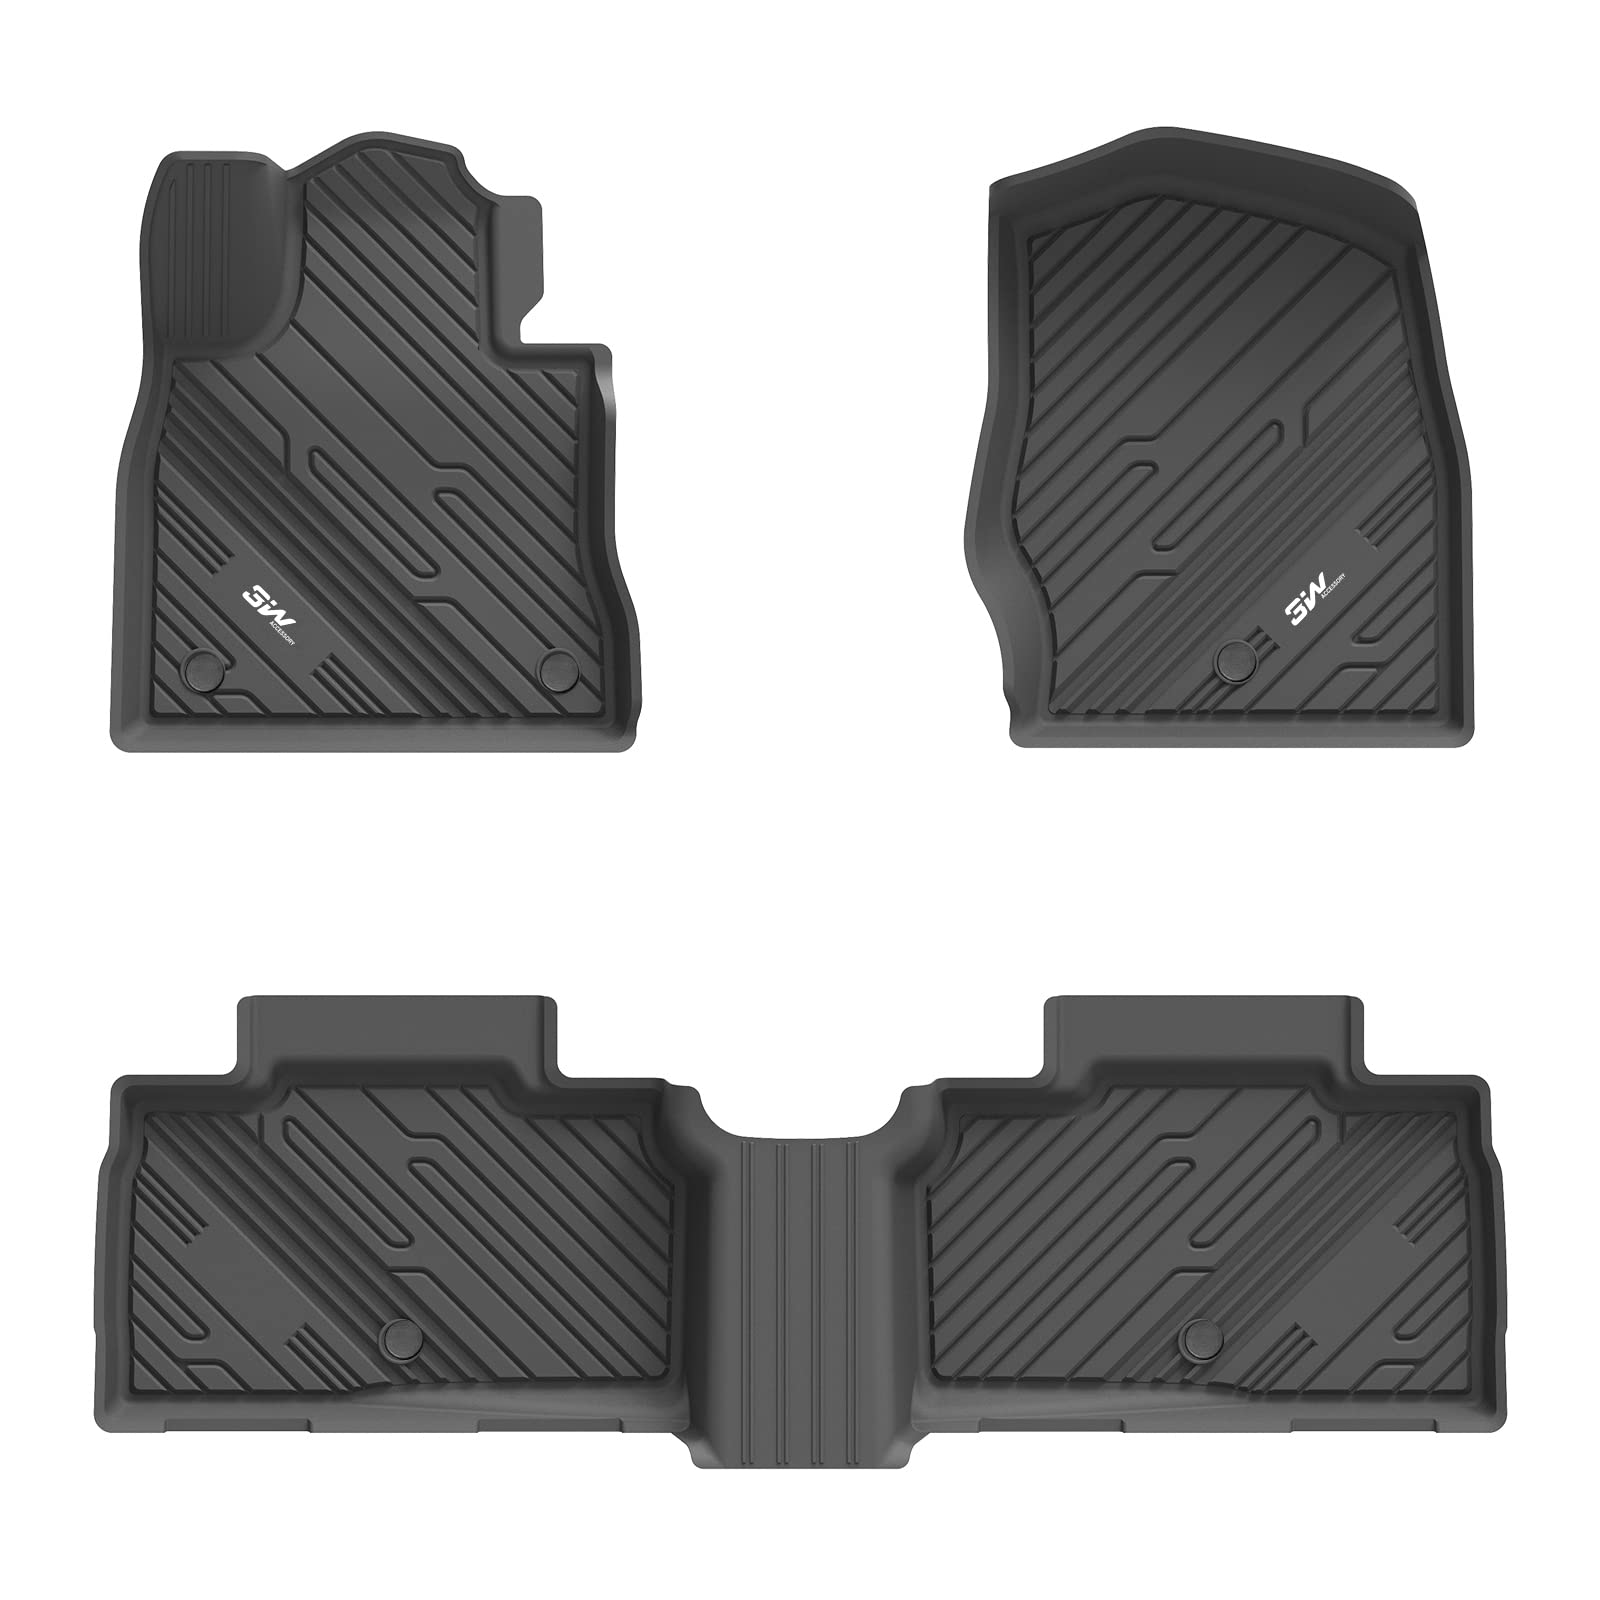 3W Ford Explorer 2020-2023 Custom Floor Mats TPE Material & All-Weather Protection Vehicles & Parts 3Wliners 2020-2023 7 Seat Explorer 2020-2023 1st&2nd Row Mats